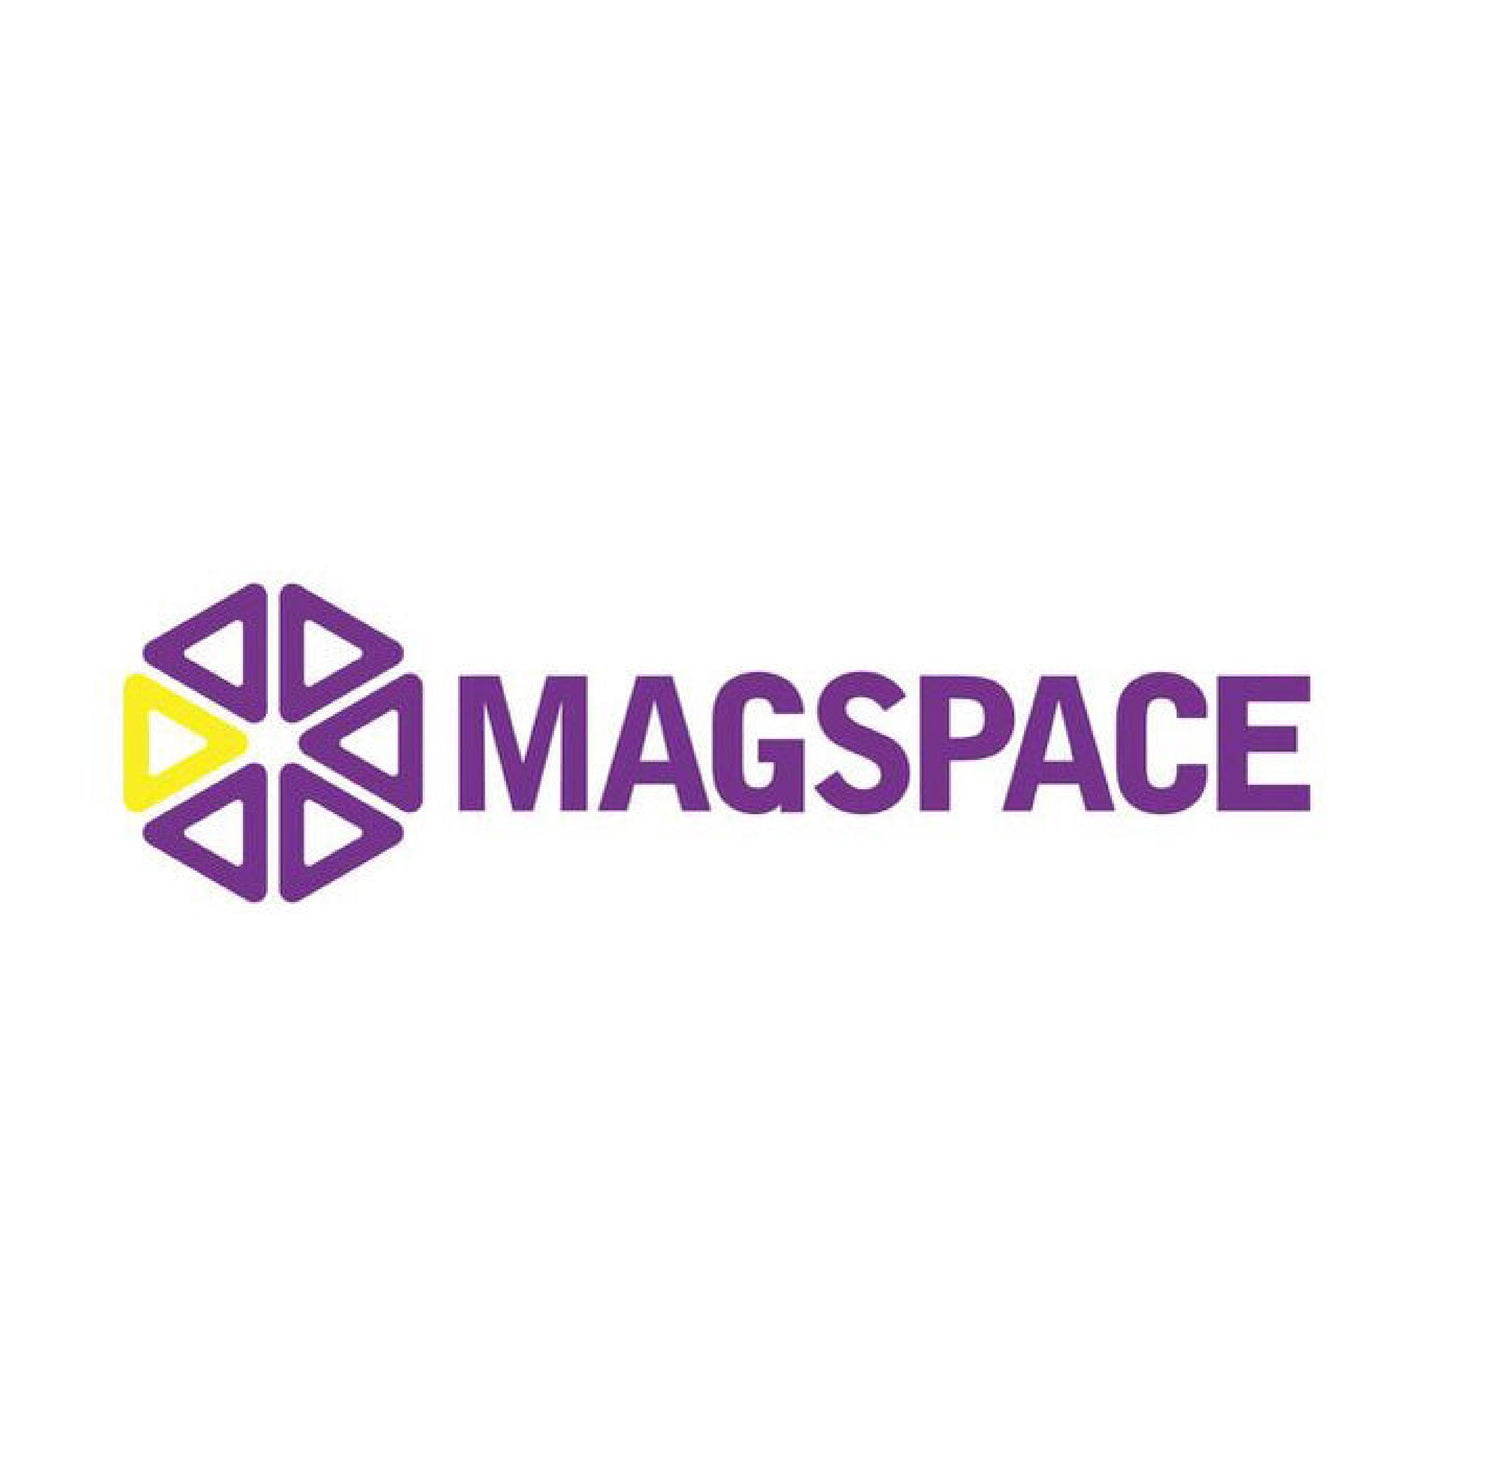 Magspace